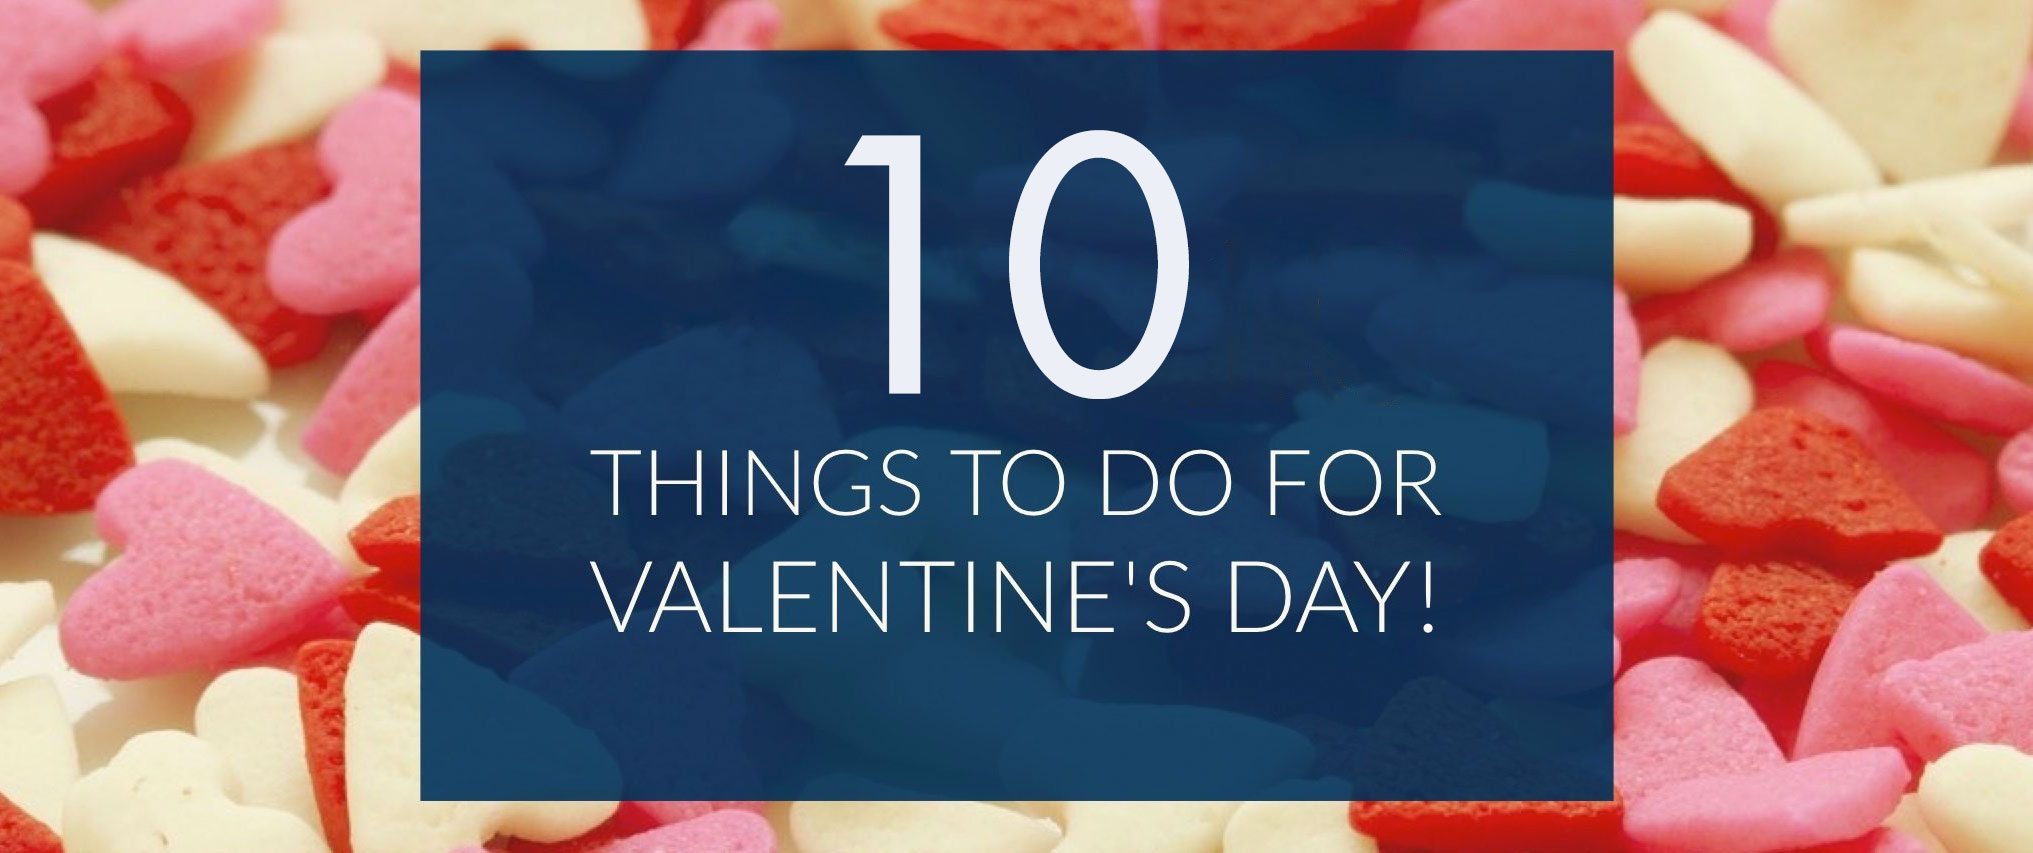 10 Things To Do For Valentine's Day Charlotte Home Finder